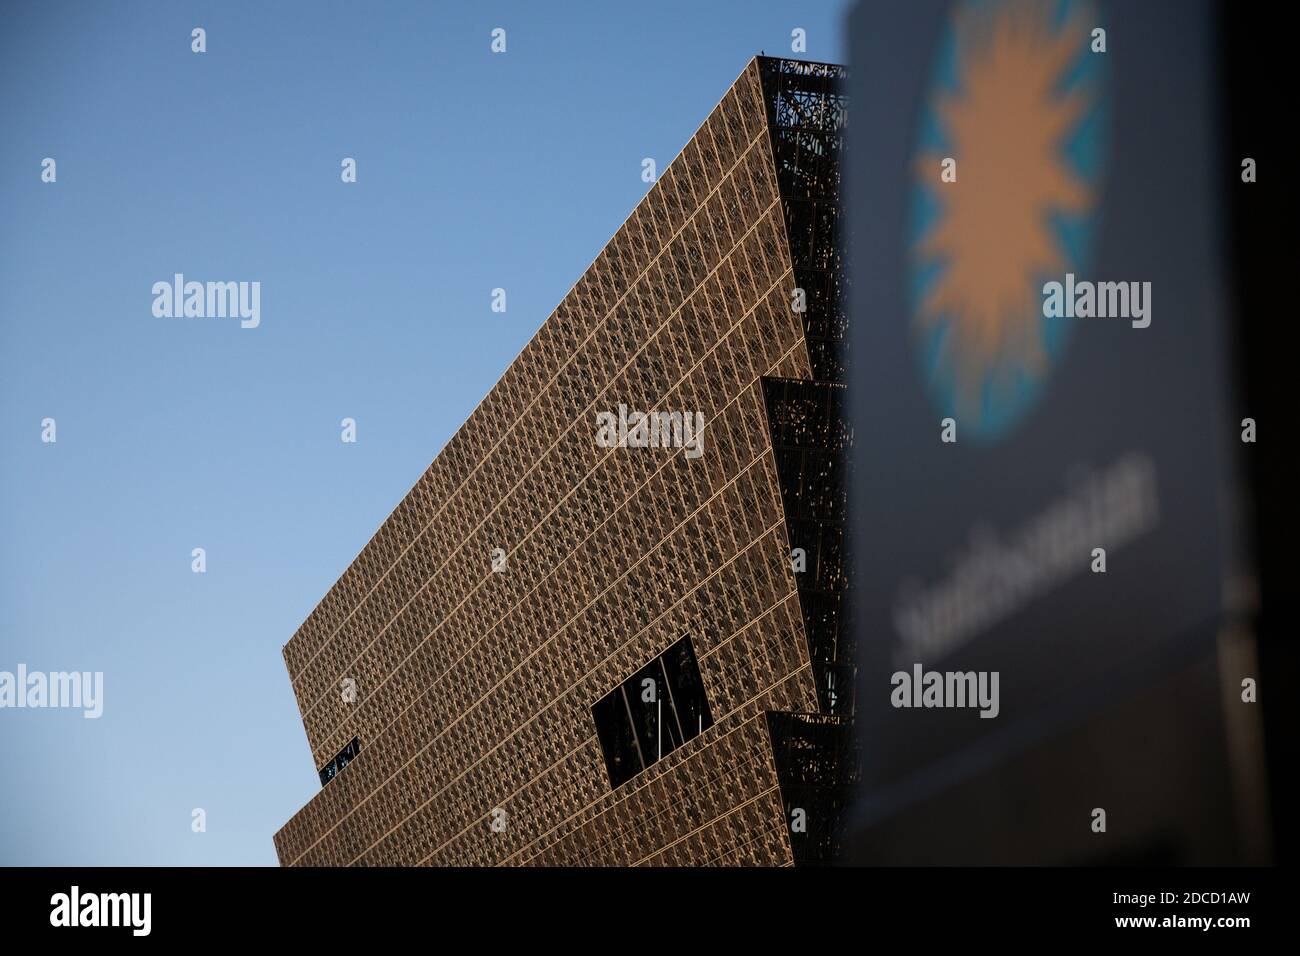 Washington, USA. 20th Nov, 2020. A general view of the National Museum of African American History and Culture (NMAAHC), a Smithsonian Institution, in Washington, DC, on November 20, 2020, amid the coronavirus pandemic. As confirmed COVID-19 case counts soar across the country, Smithsonian Institutions in Washington announced they would be closing again starting next week. (Graeme Sloan/Sipa USA) Credit: Sipa USA/Alamy Live News Stock Photo